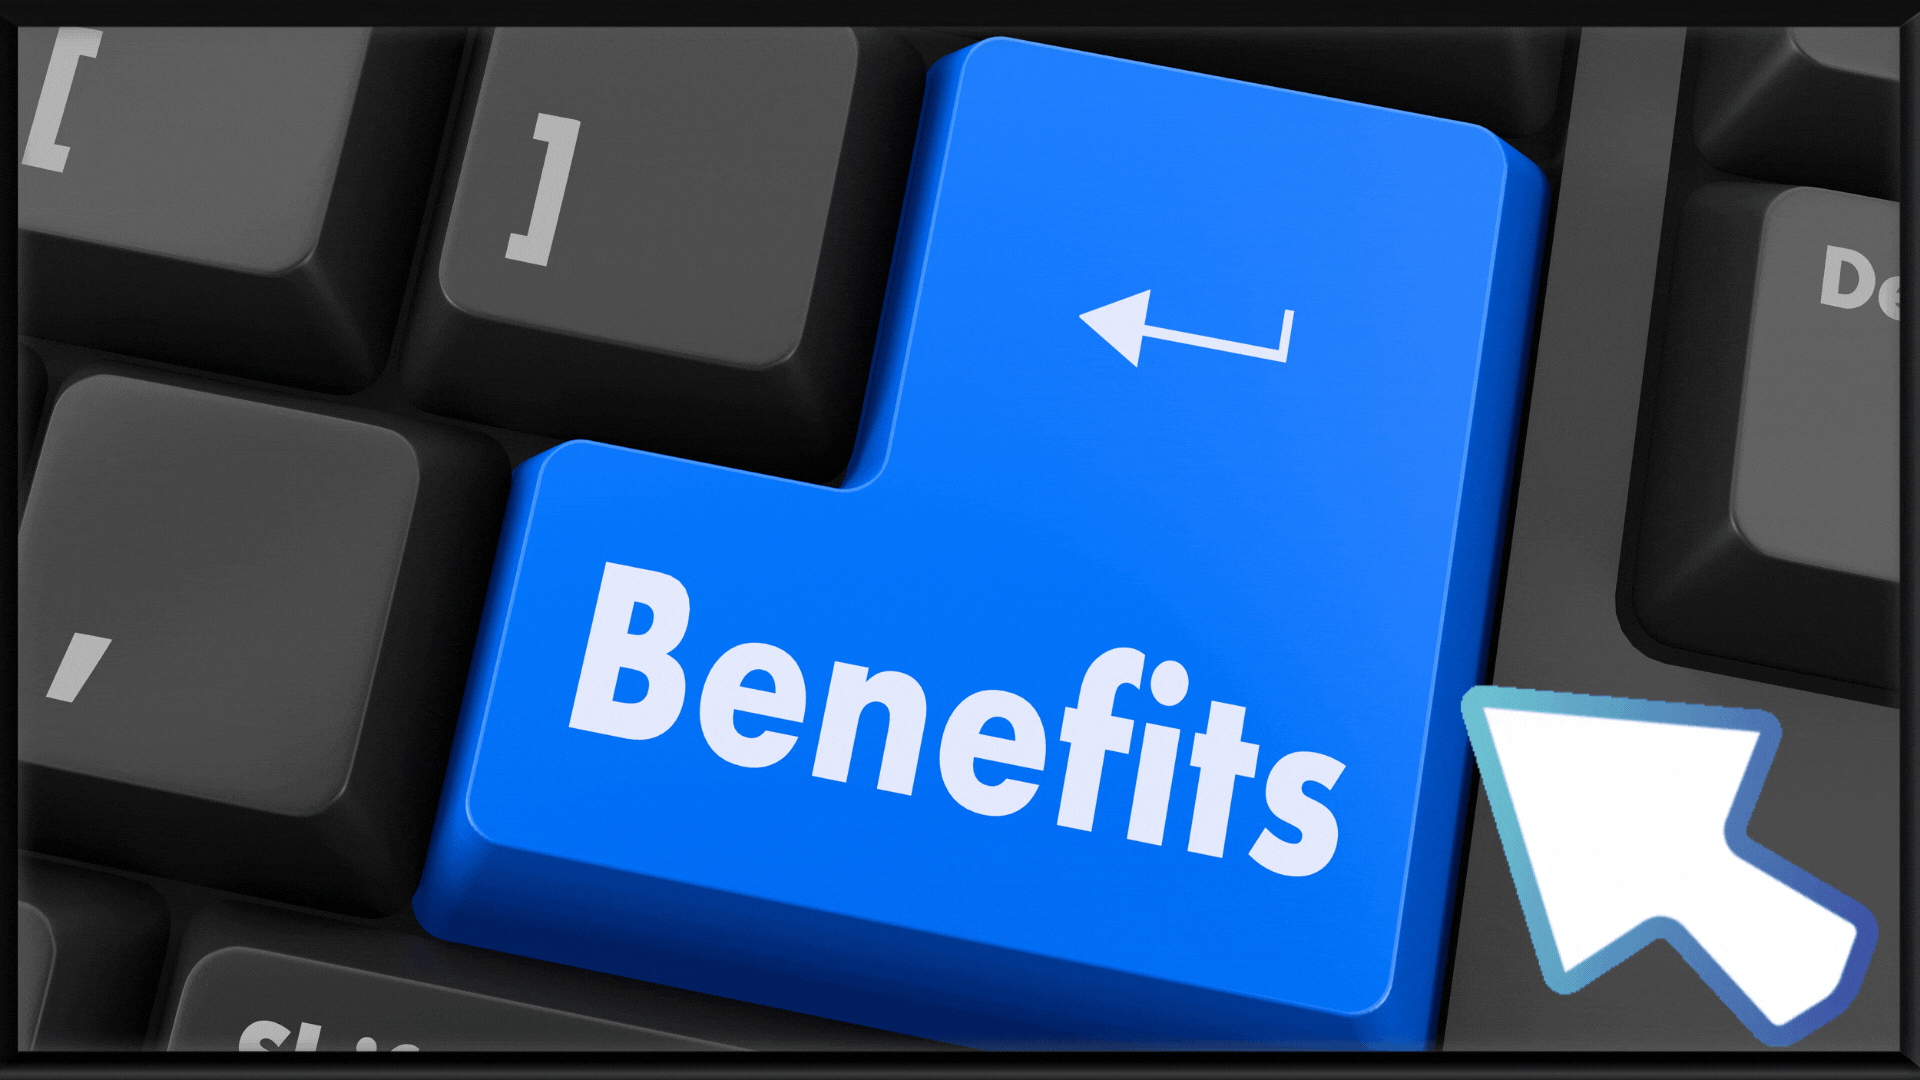 Benefits button on keyboard